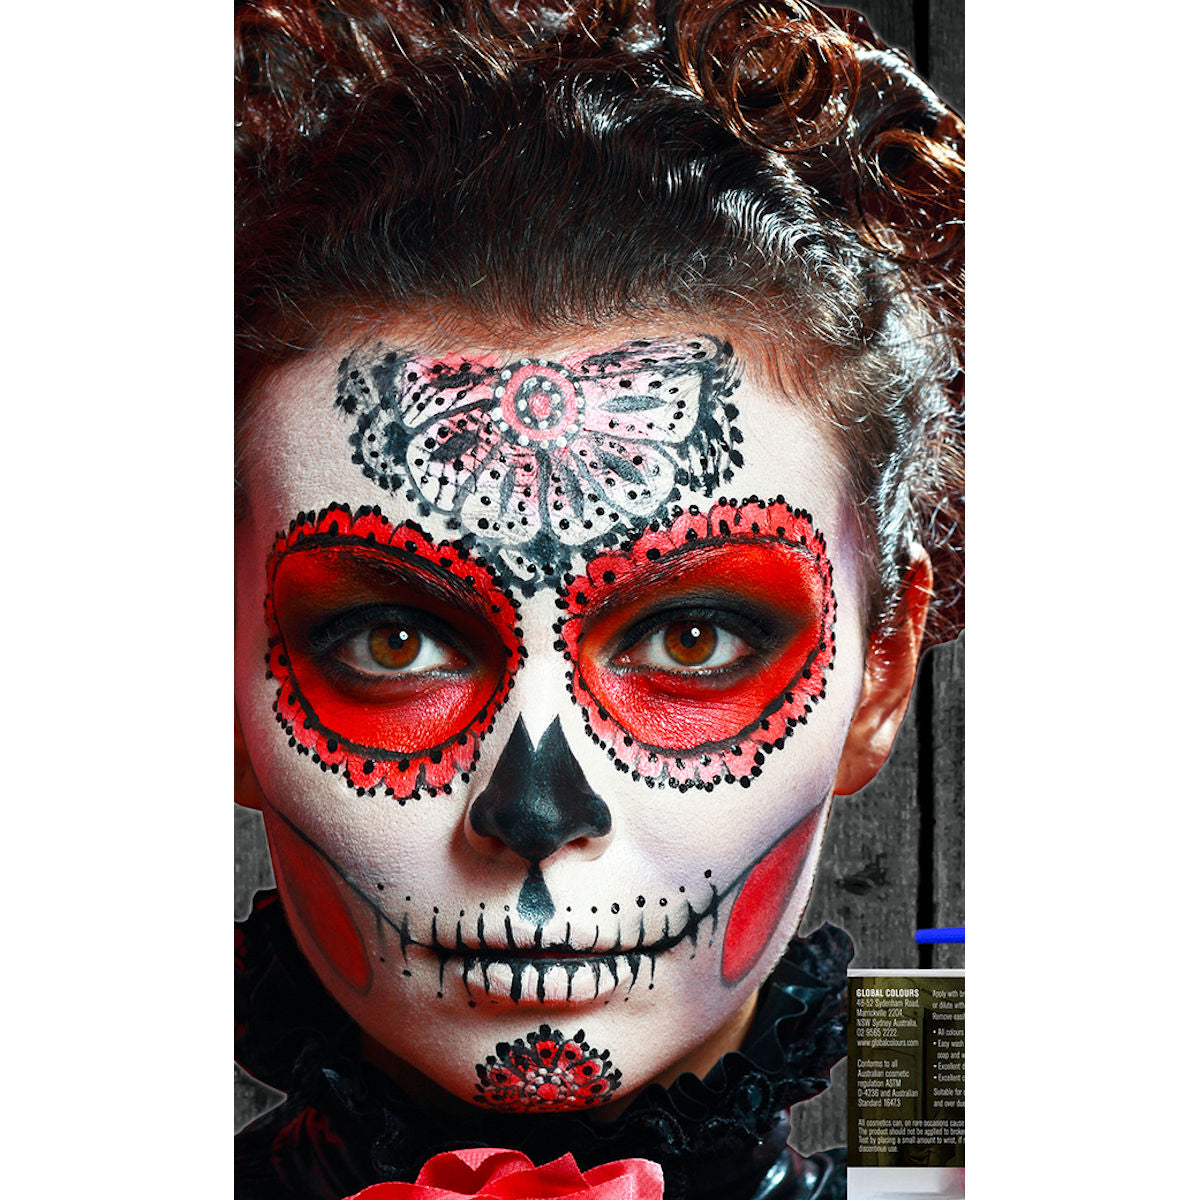 Day of the Dead Face Paint Set Halloween Special FX Sugar Skull face make-up